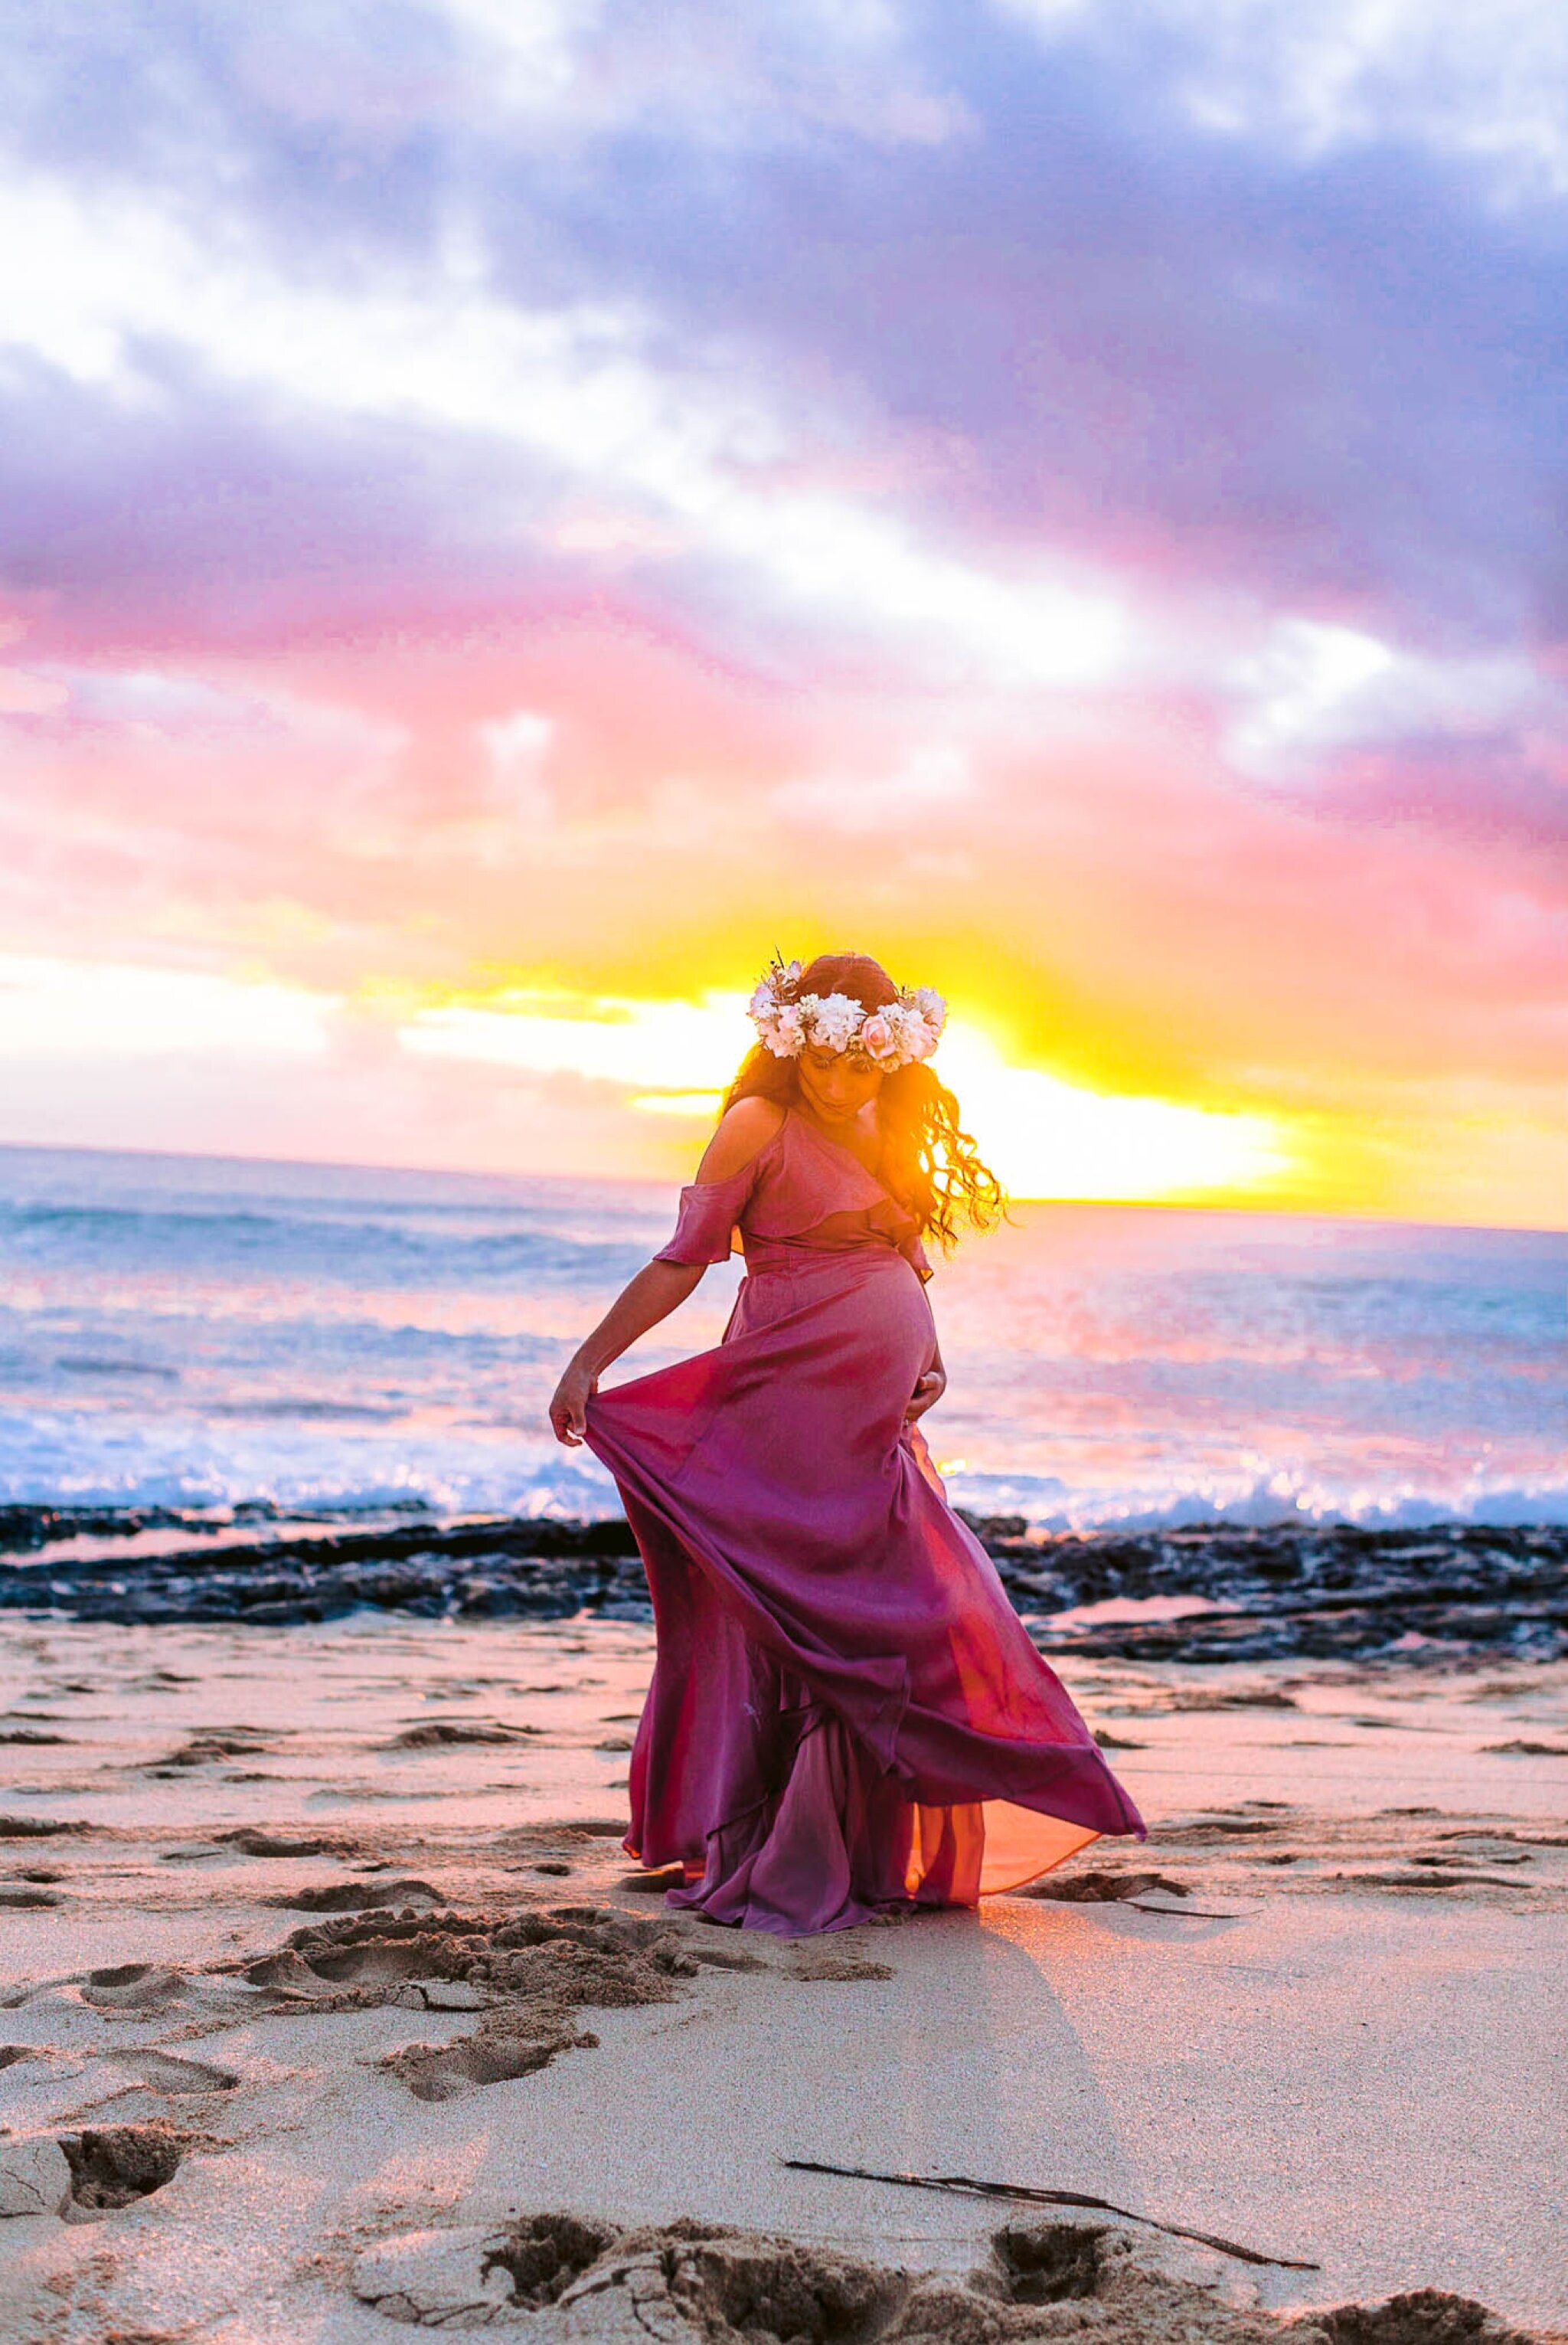 Sunset Maternity Photography Session at Maili Beach Park, Oahu West Side - Hawaii Family Photographer